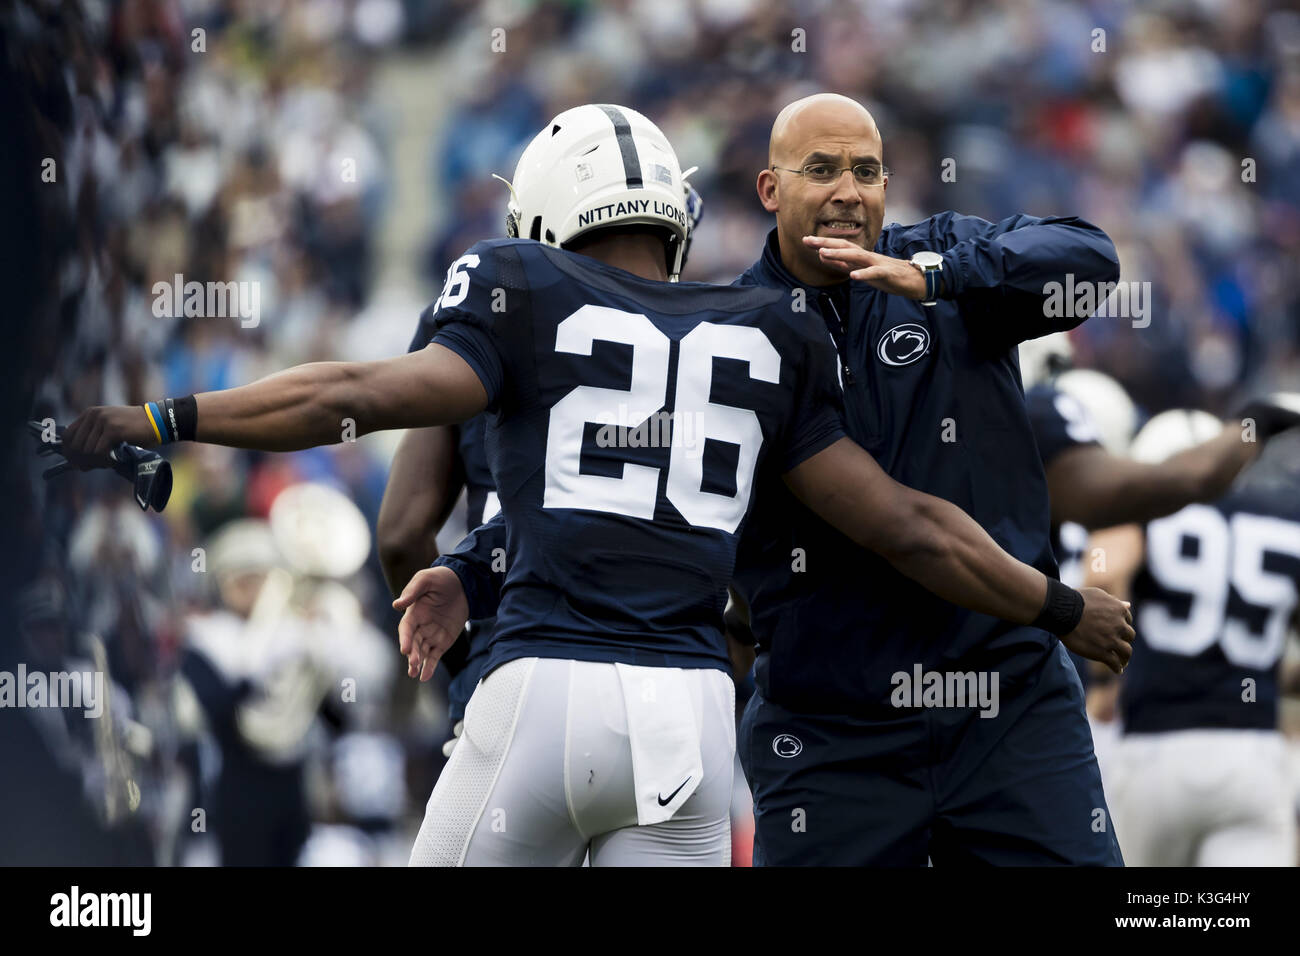 University Park, Pennsylvania, USA. 2nd Sep, 2017. September 02, 2017: Penn State Nittany Lions head coach James Franklin hugs Penn State Nittany Lions running back Saquon Barkley (26) as they take the field during the NCAA football game between Penn State Nittany Lions and Akron Zips at Beaver Stadium in University Park, Pennsylvania. Credit: Scott Taetsch/ZUMA Wire/Alamy Live News Stock Photo